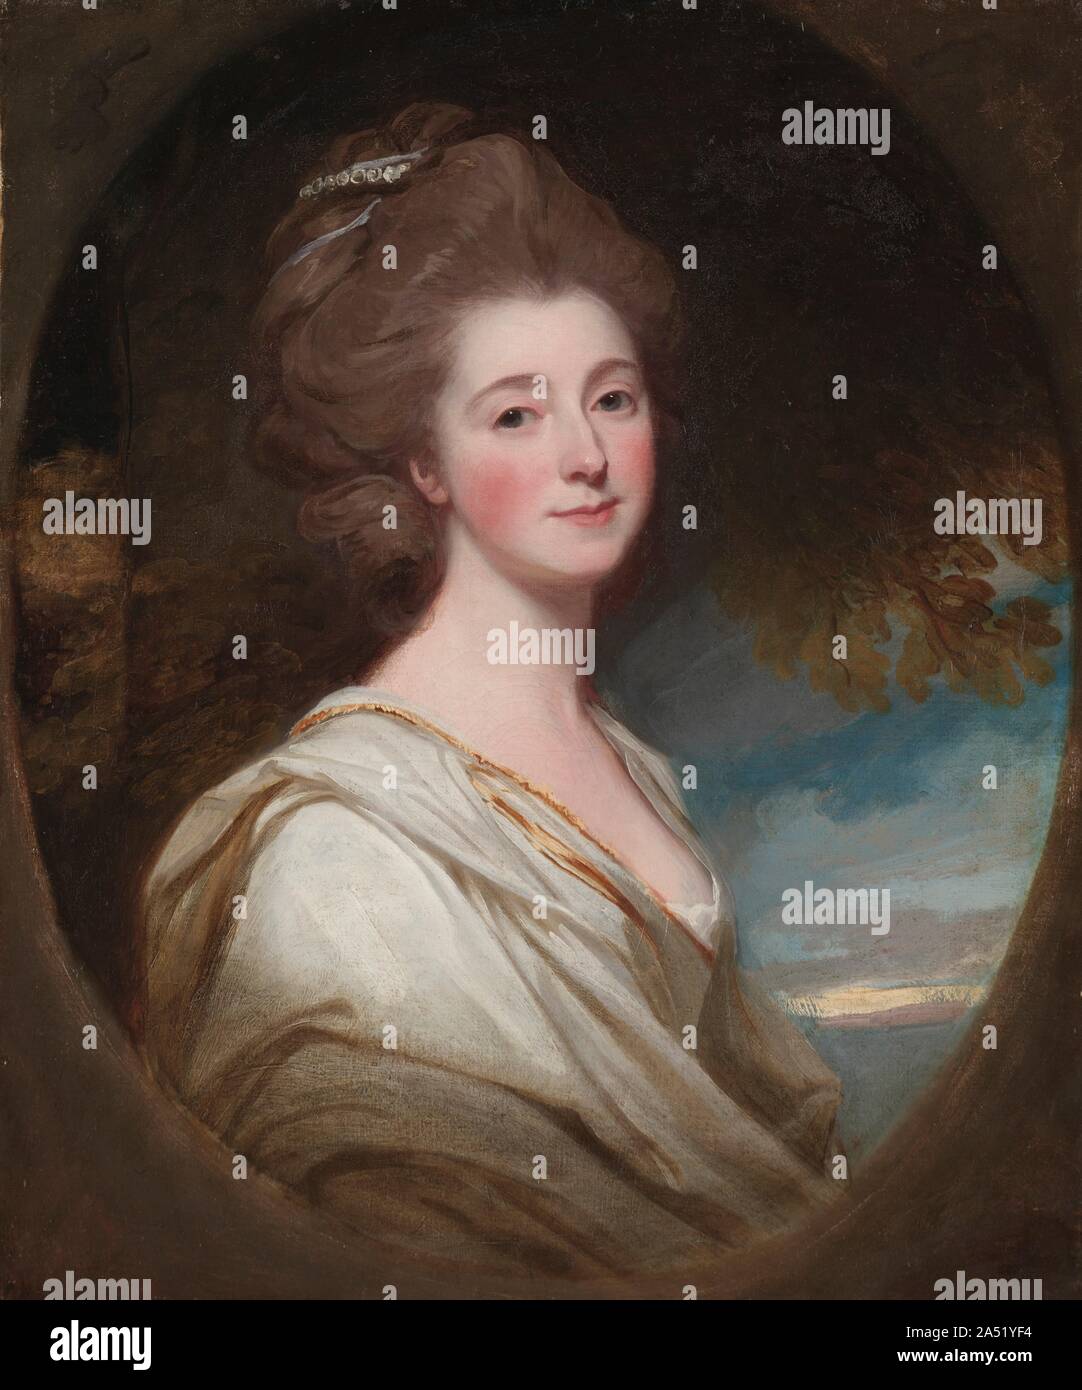 Portrait of Jane Hoskyns, c. 1778-1780. The sitter married Sir John Read in 1774, who also sat for a portrait by the artist in 1788. Born in Lancashire, Romney first apprenticed in his father&#x2019;s cabinetmaker&#x2019;s shop. He worked in the north of England until 1762, when he settled in London. There he became a successful portraitist, alongside Joshua Reynolds and Thomas Gainsborough. As with many successful portraitists, his heart lay elsewhere and he dreamed of making history paintings, but his plans for grandiose compositions rarely advanced beyond drawings. Stock Photo